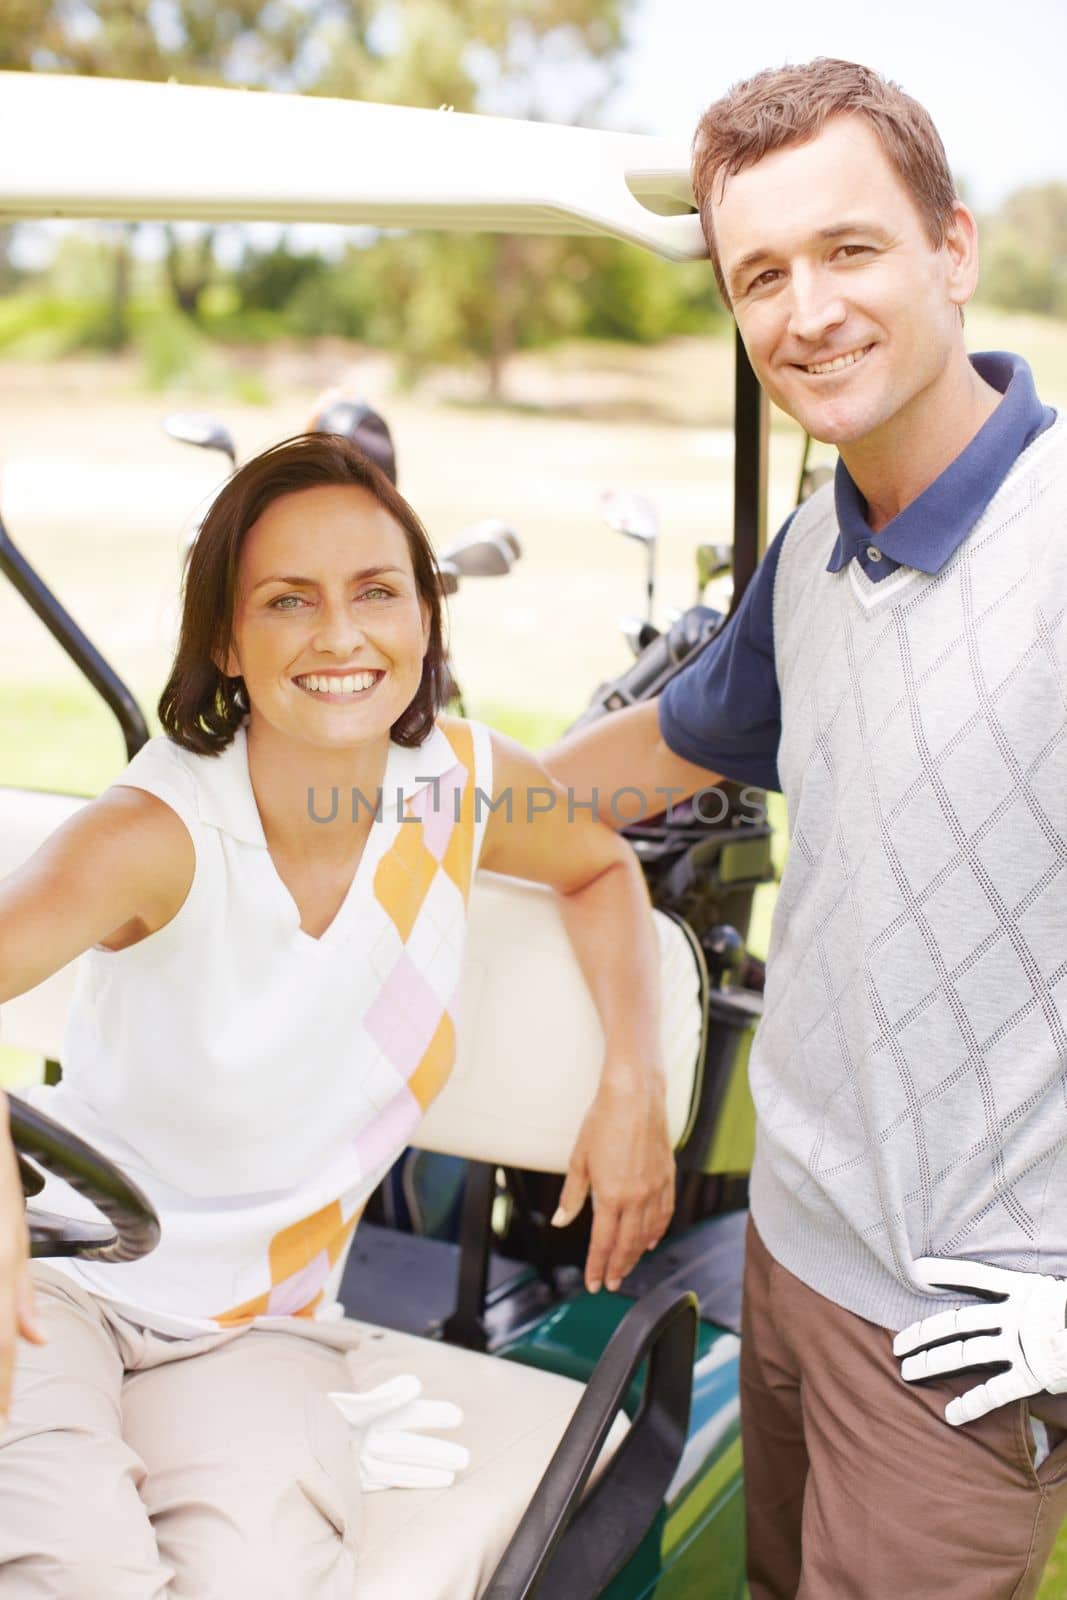 Their love of golf brought them together. Smiling woman seated in a golf cart with her husband standing alongside her. by YuriArcurs